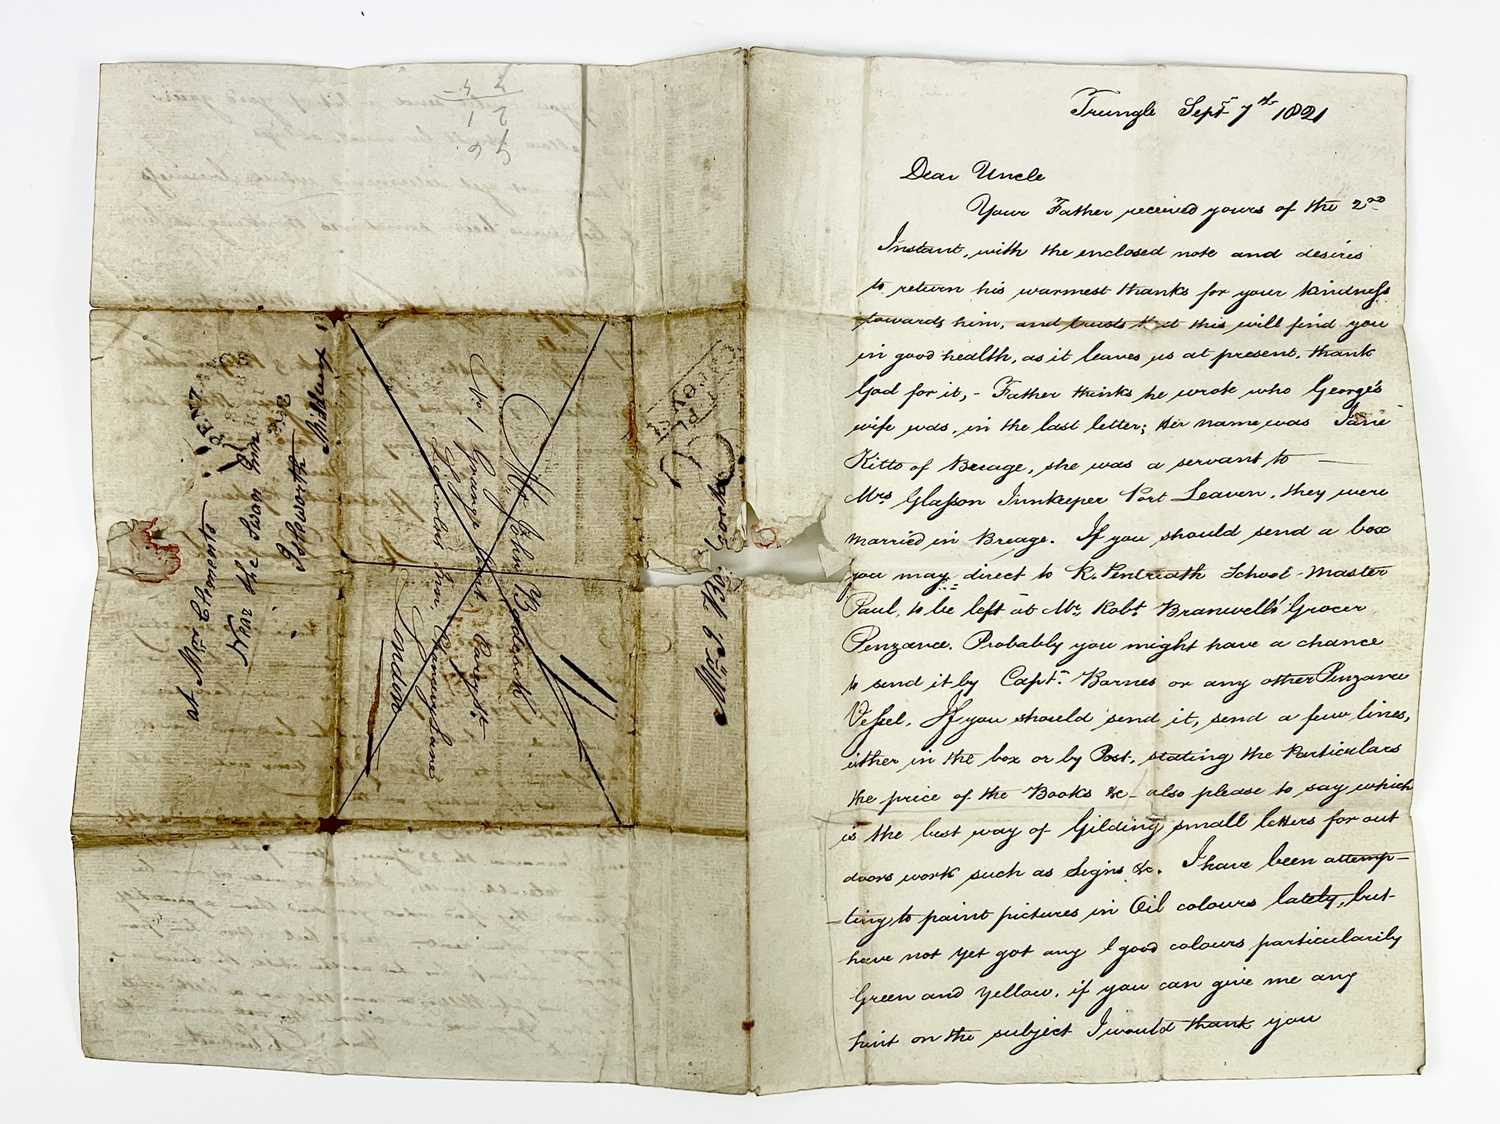 R. T. PENTREATH (artist). Handwritten letter from Pentreath to his uncle, in regards to shipping oil